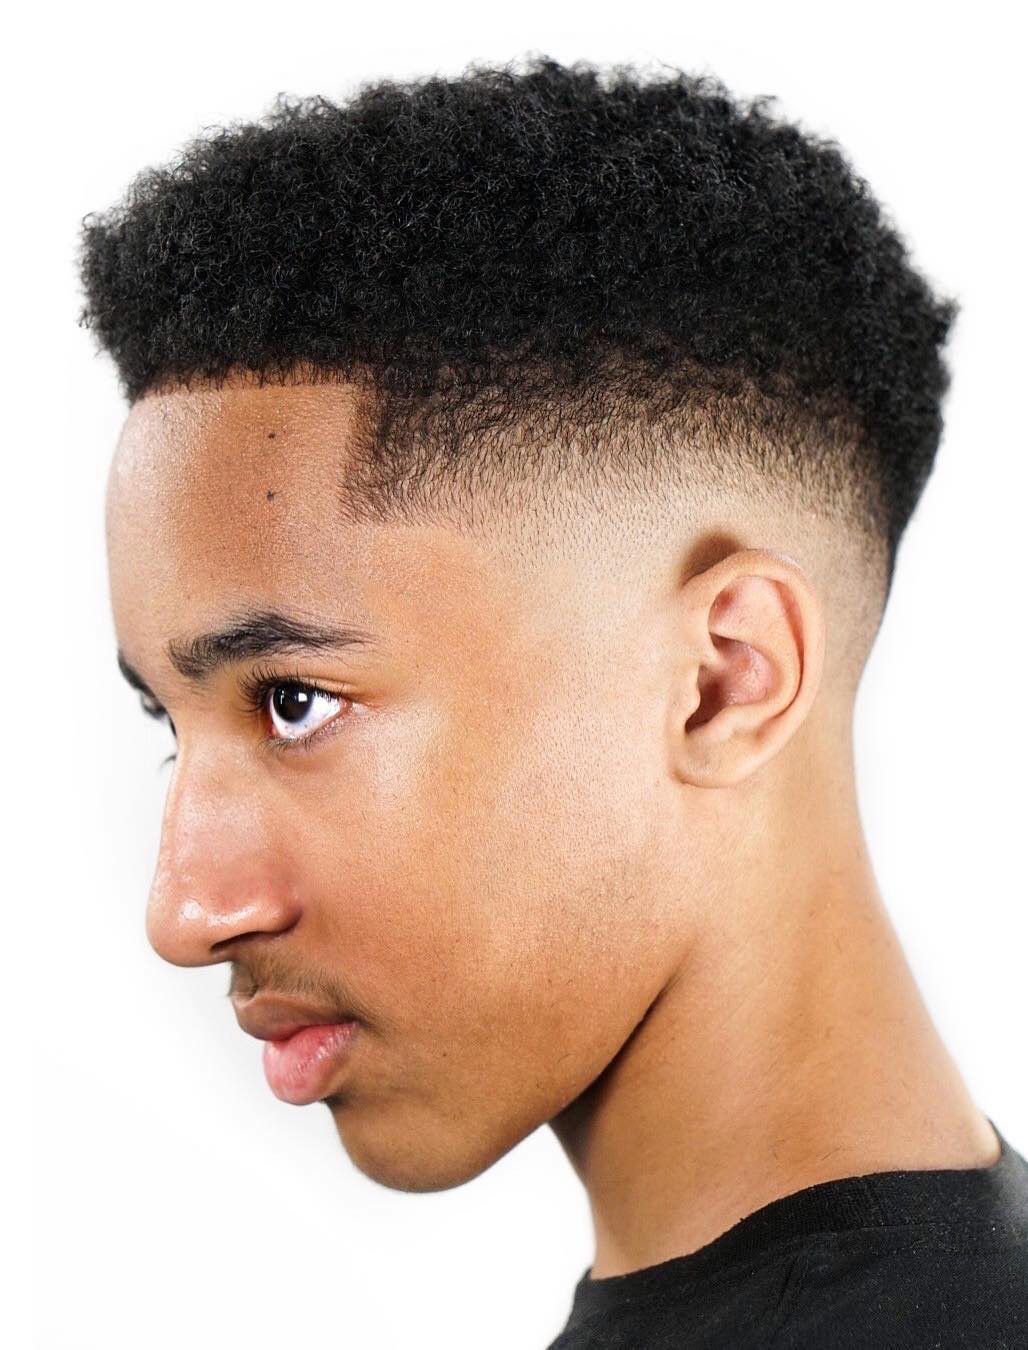 20 Eye Catching Haircuts For Black Boys Therefore, it goes without saying that black boy's fade haircuts take center stage. 20 eye catching haircuts for black boys